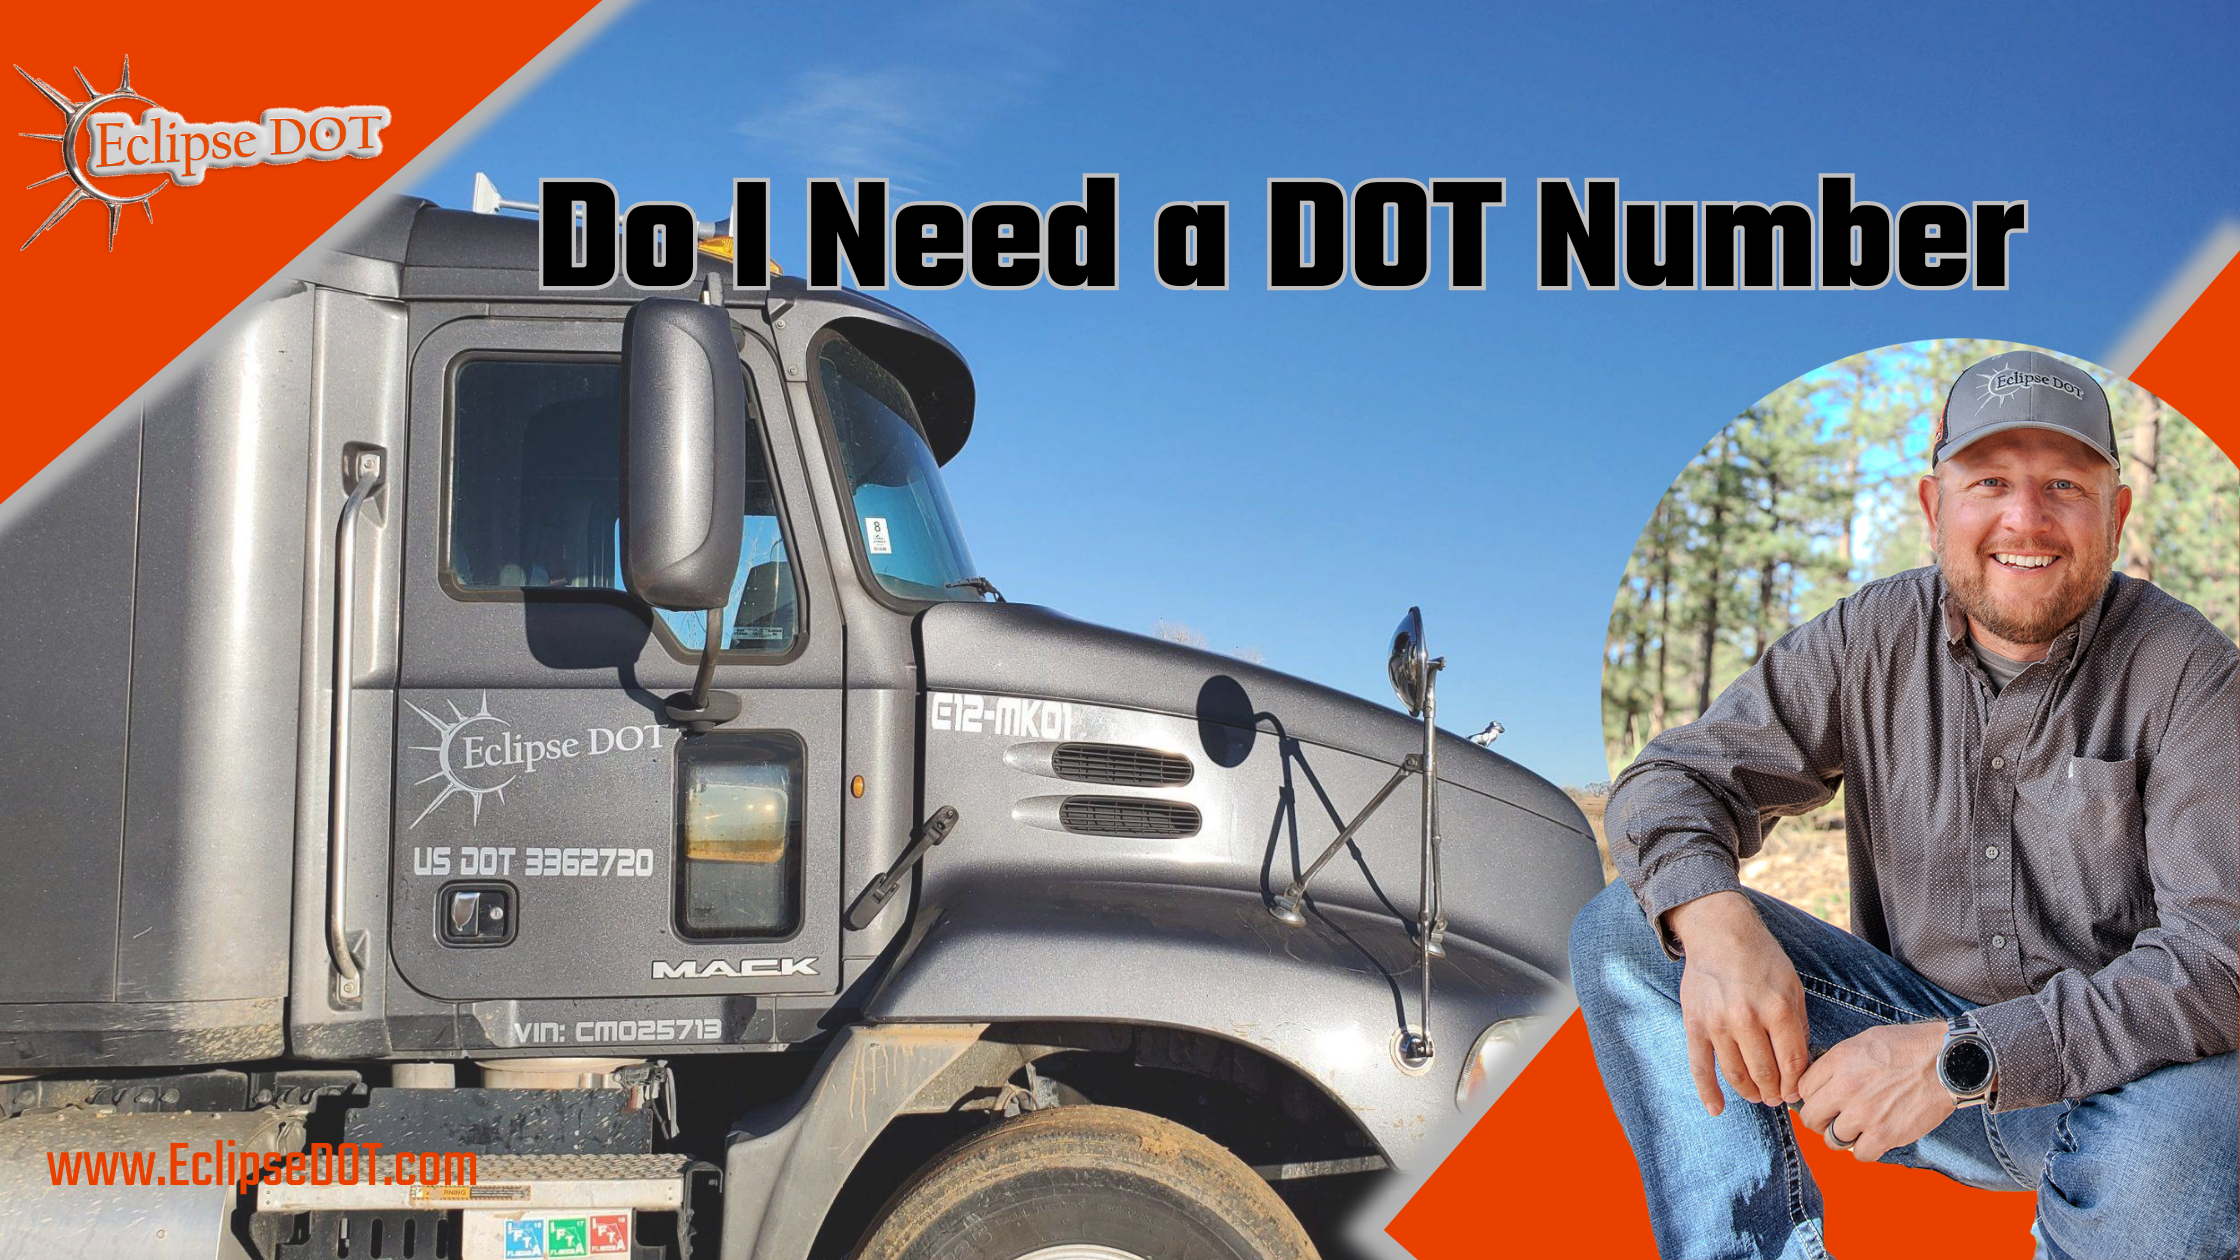 Illustration depicting a DOT number on a commercial vehicle